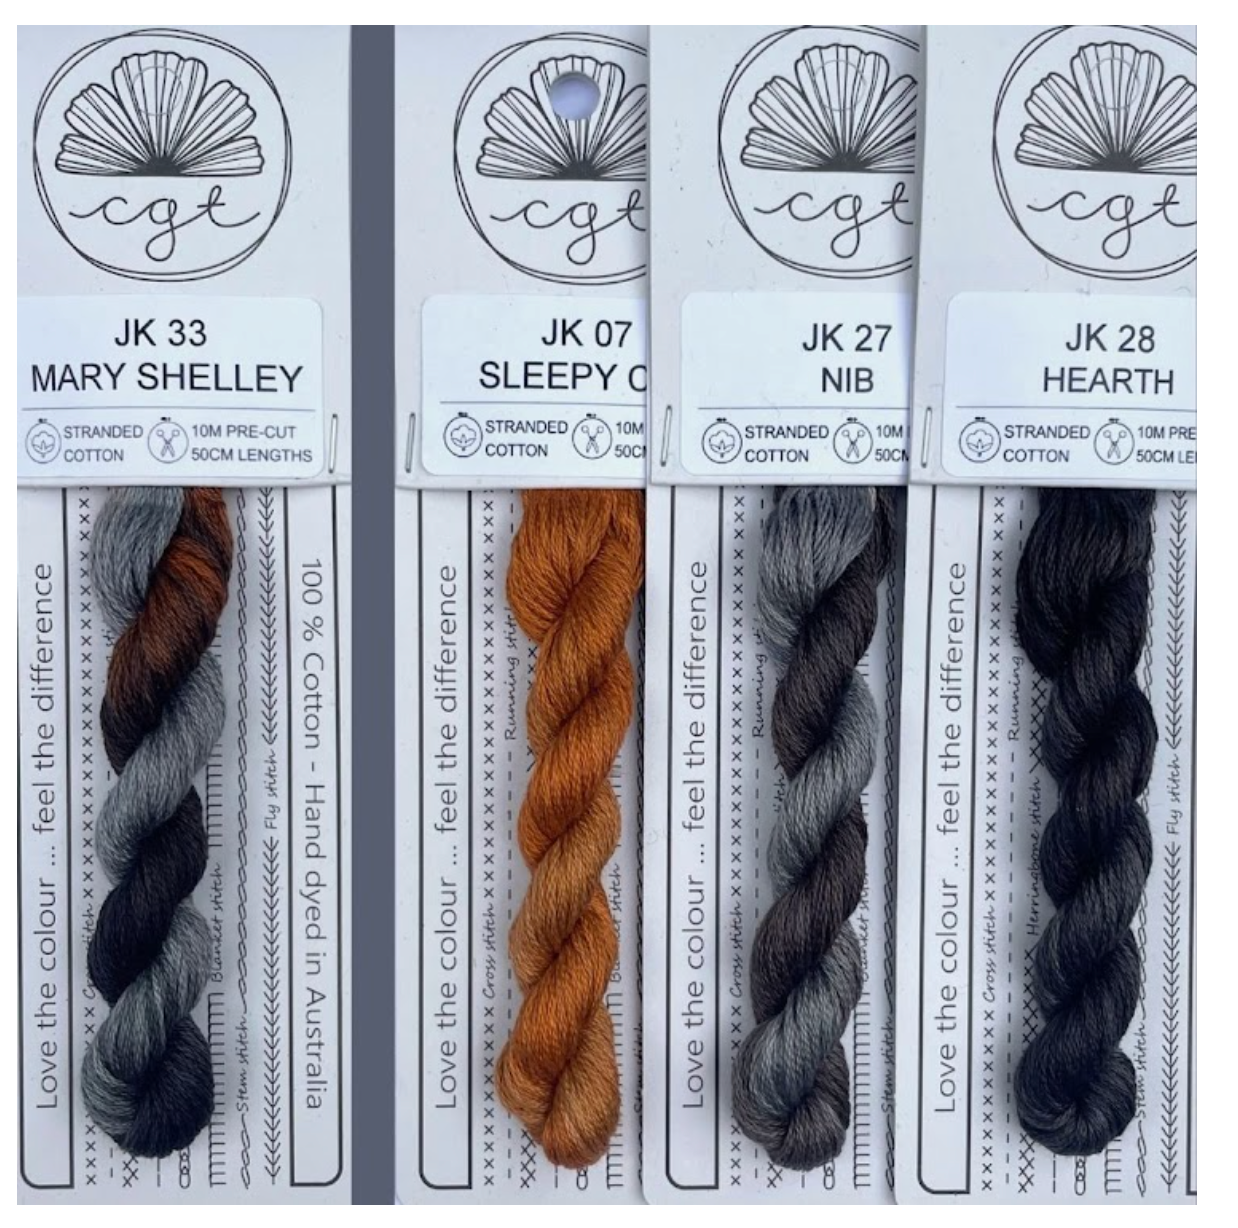 CGT - Mary Shelley Stitchers Palette Thread Pack